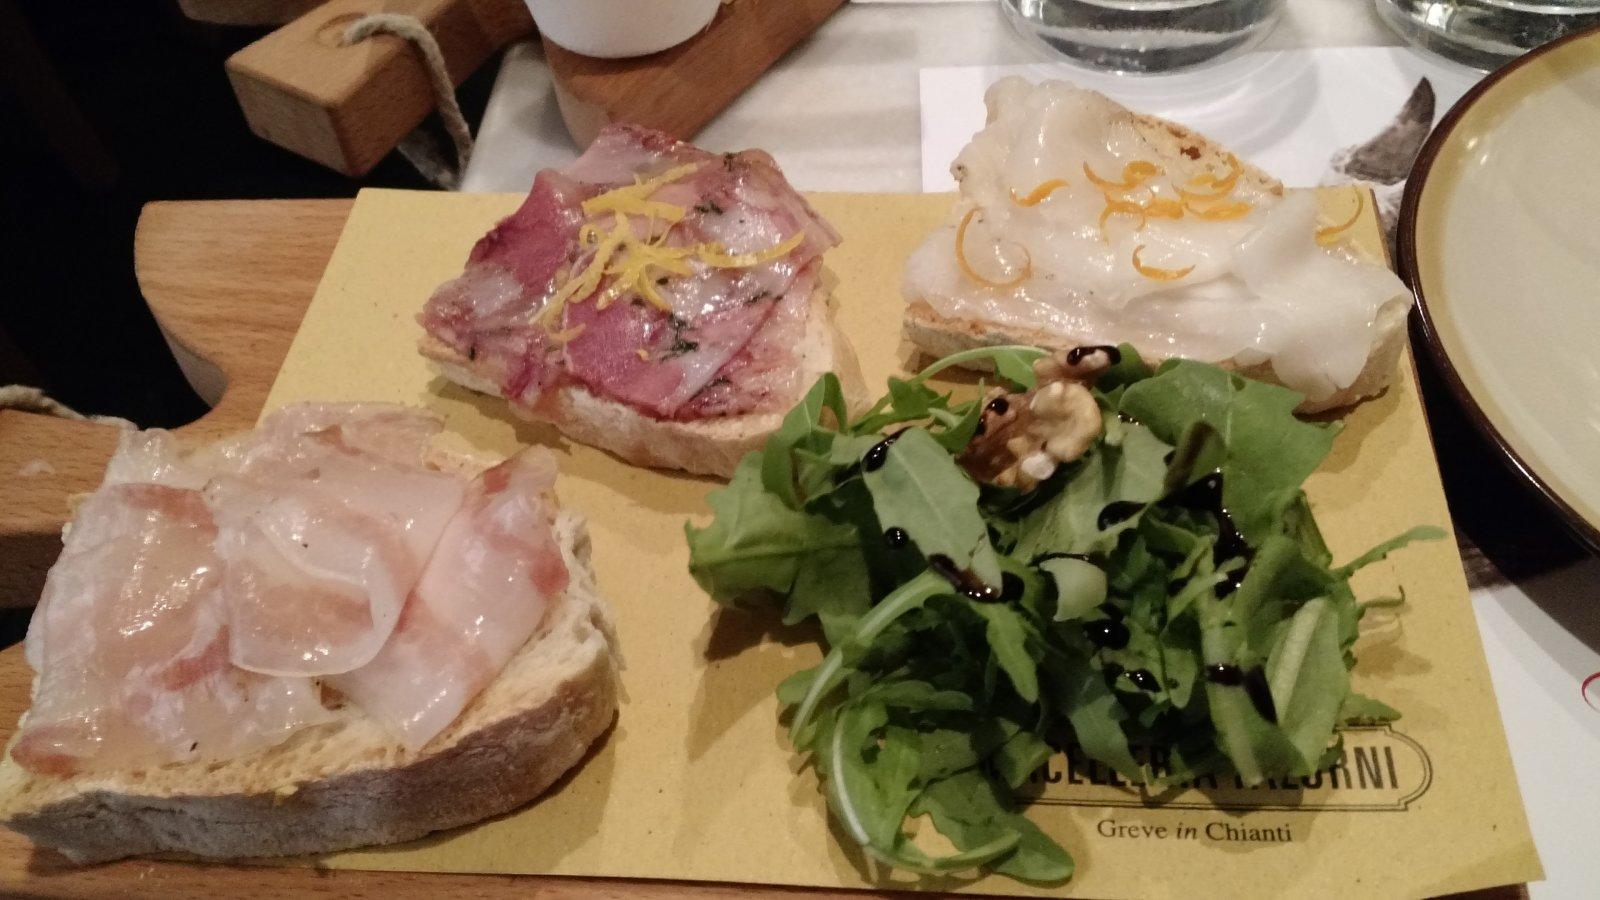 OMG, showoff pictures from Florence. This was amazing citrus-y lardo on crusty bread.